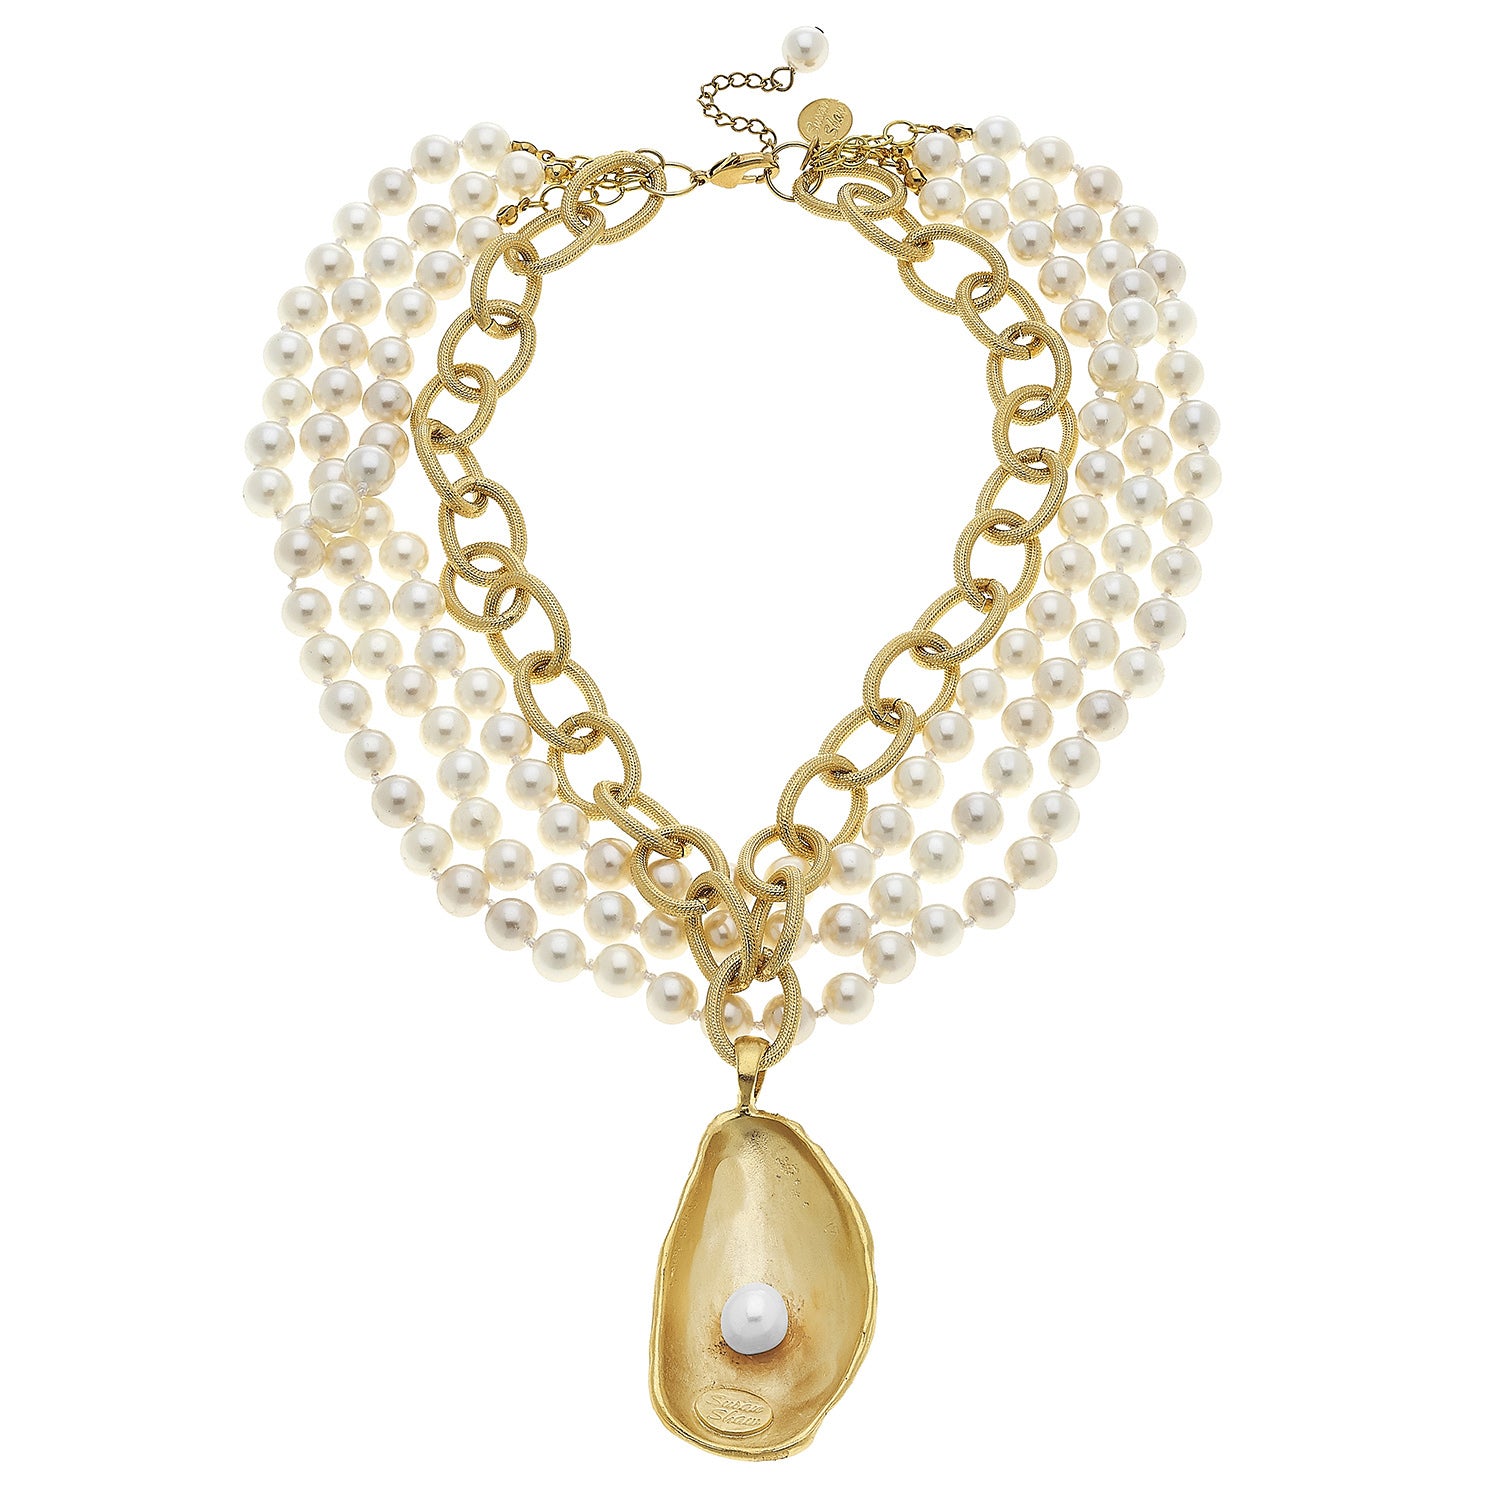 Susan Shaw Jewelry Pearl Oyster Shell Necklace, 3 Strand Pearl Pendant in Gold